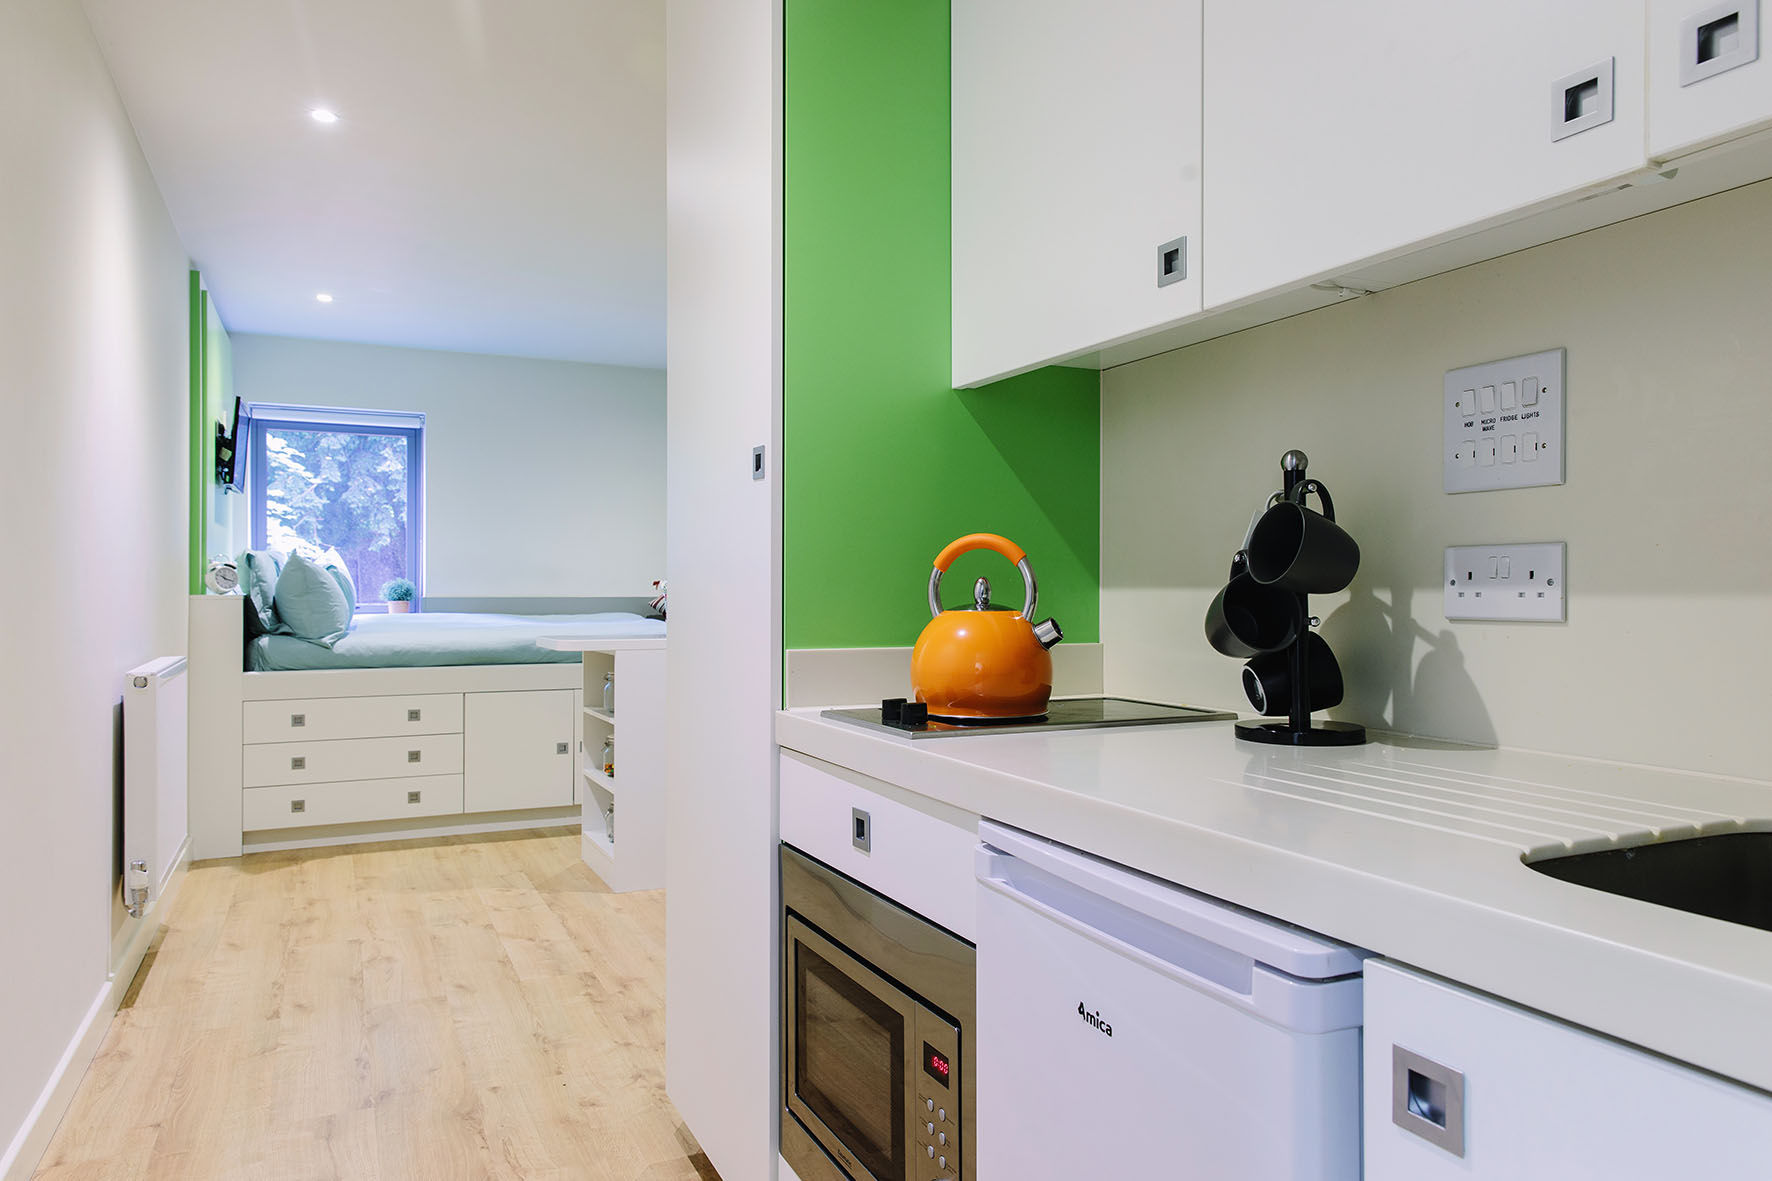 Kitchen in a Classic Studio room at Cathedral Park, Unite Students accommodation